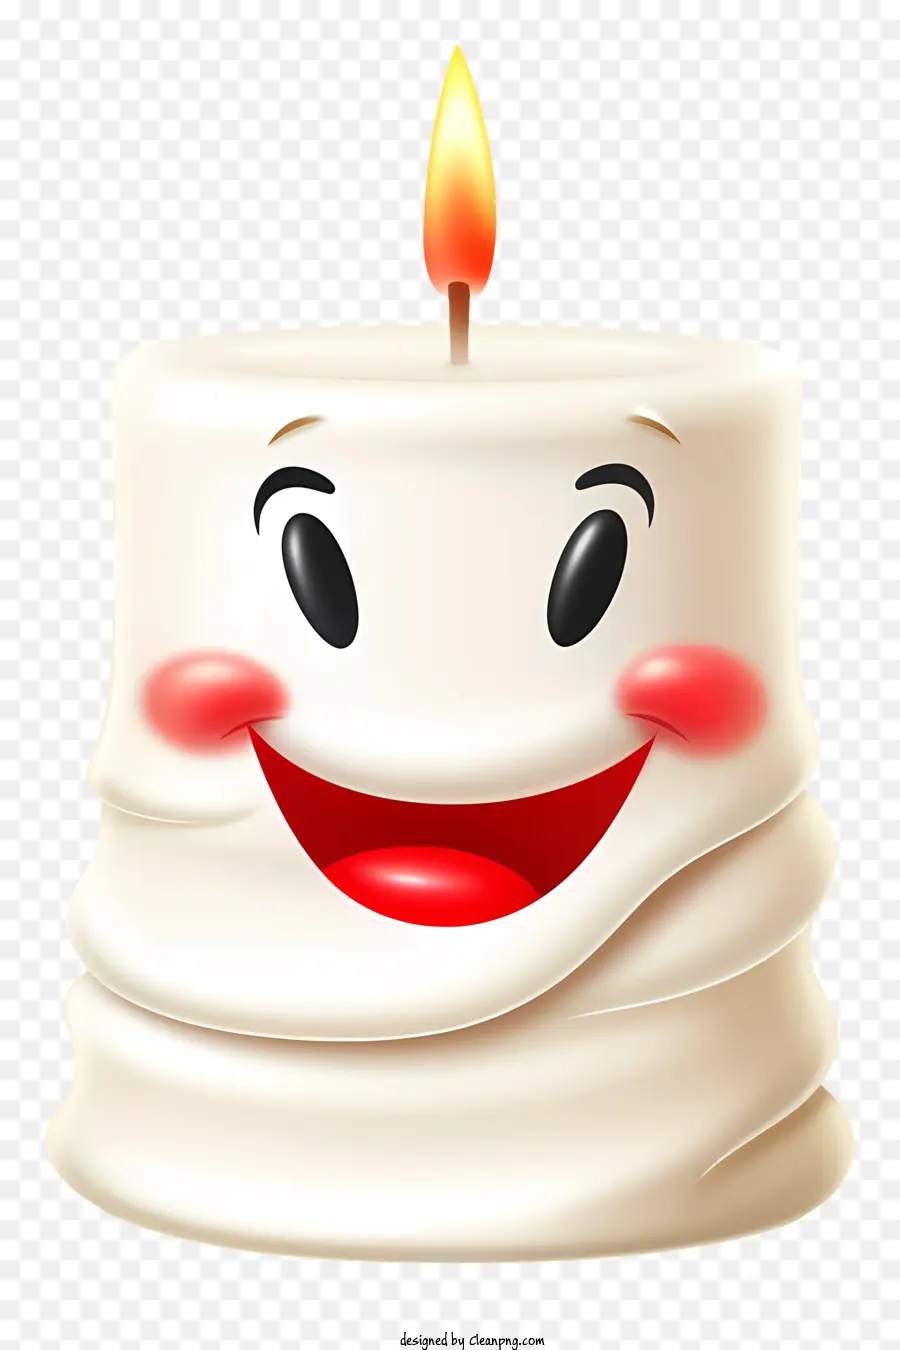 candle smiling face lit candle white face smiling mouth